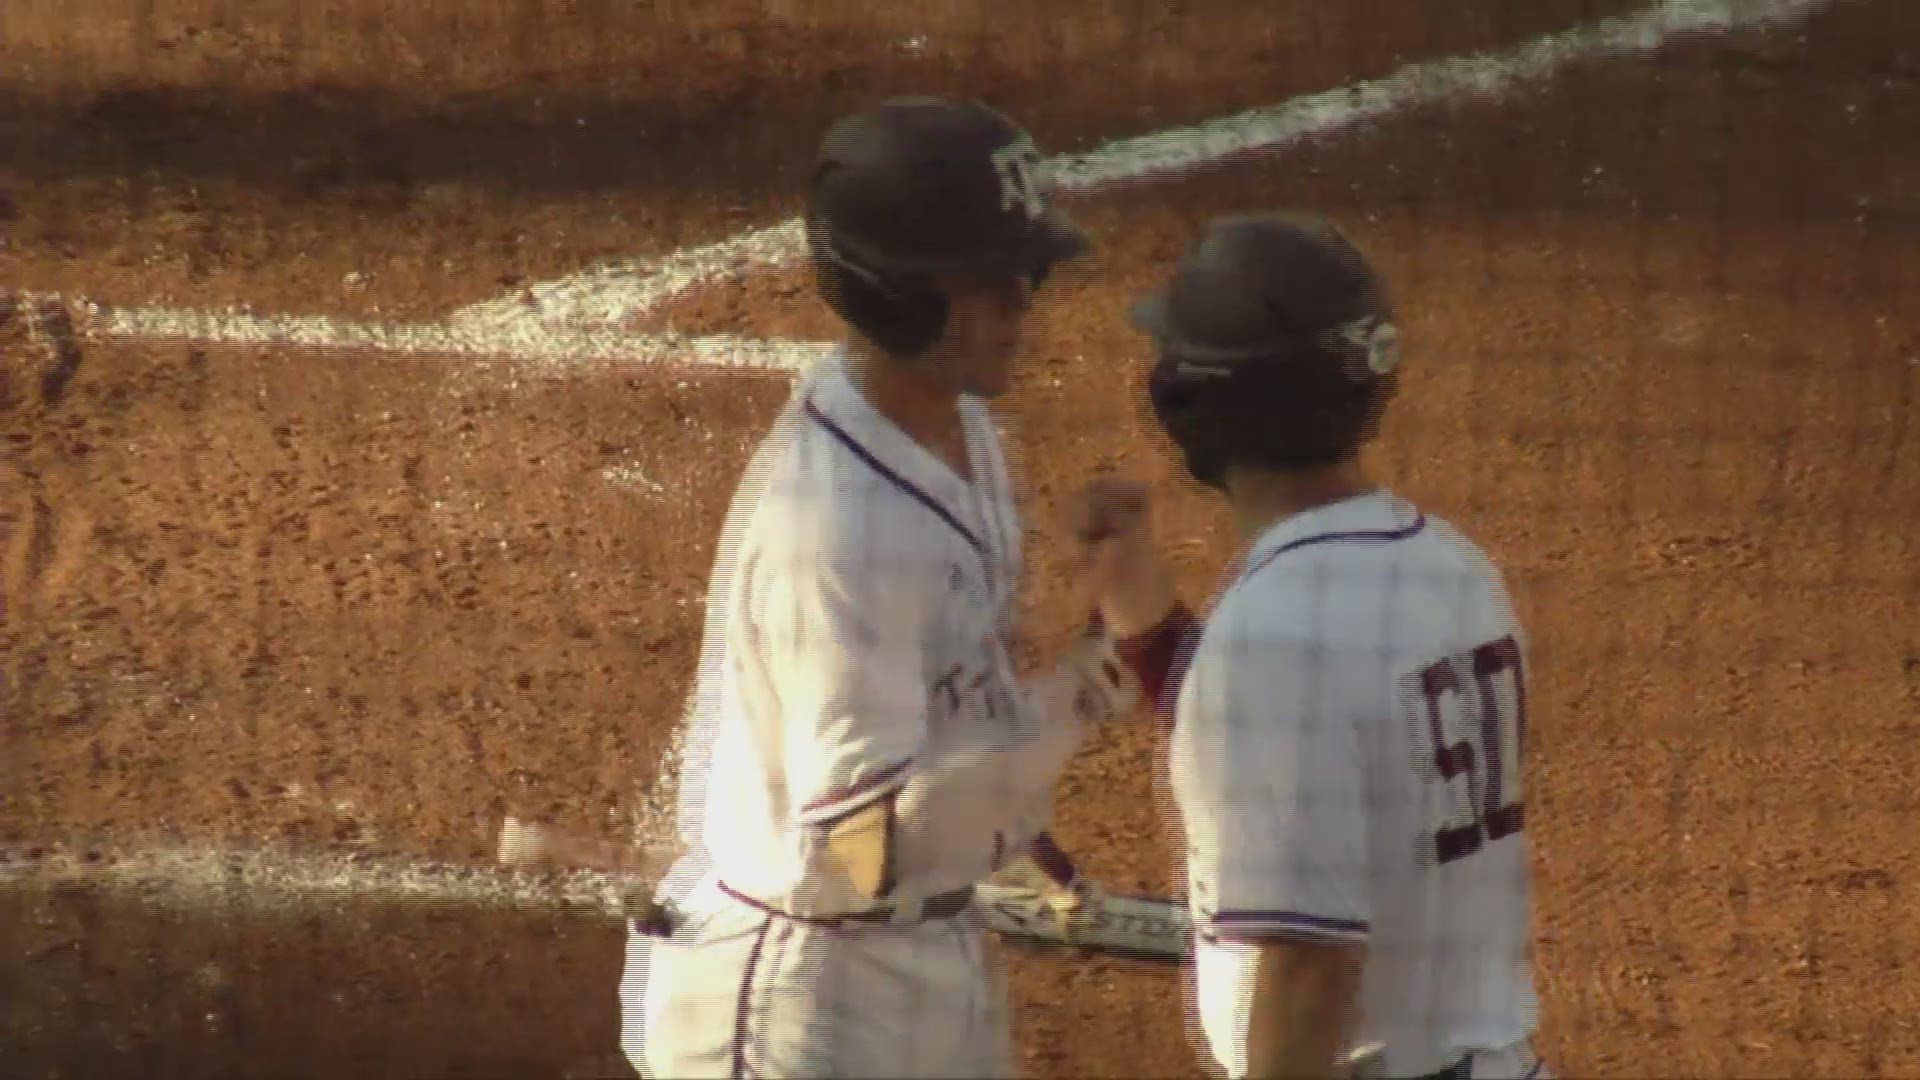 Texas and Texas A&M played baseball in College Station on Tuesday with the Aggies getting the 6-5 win.